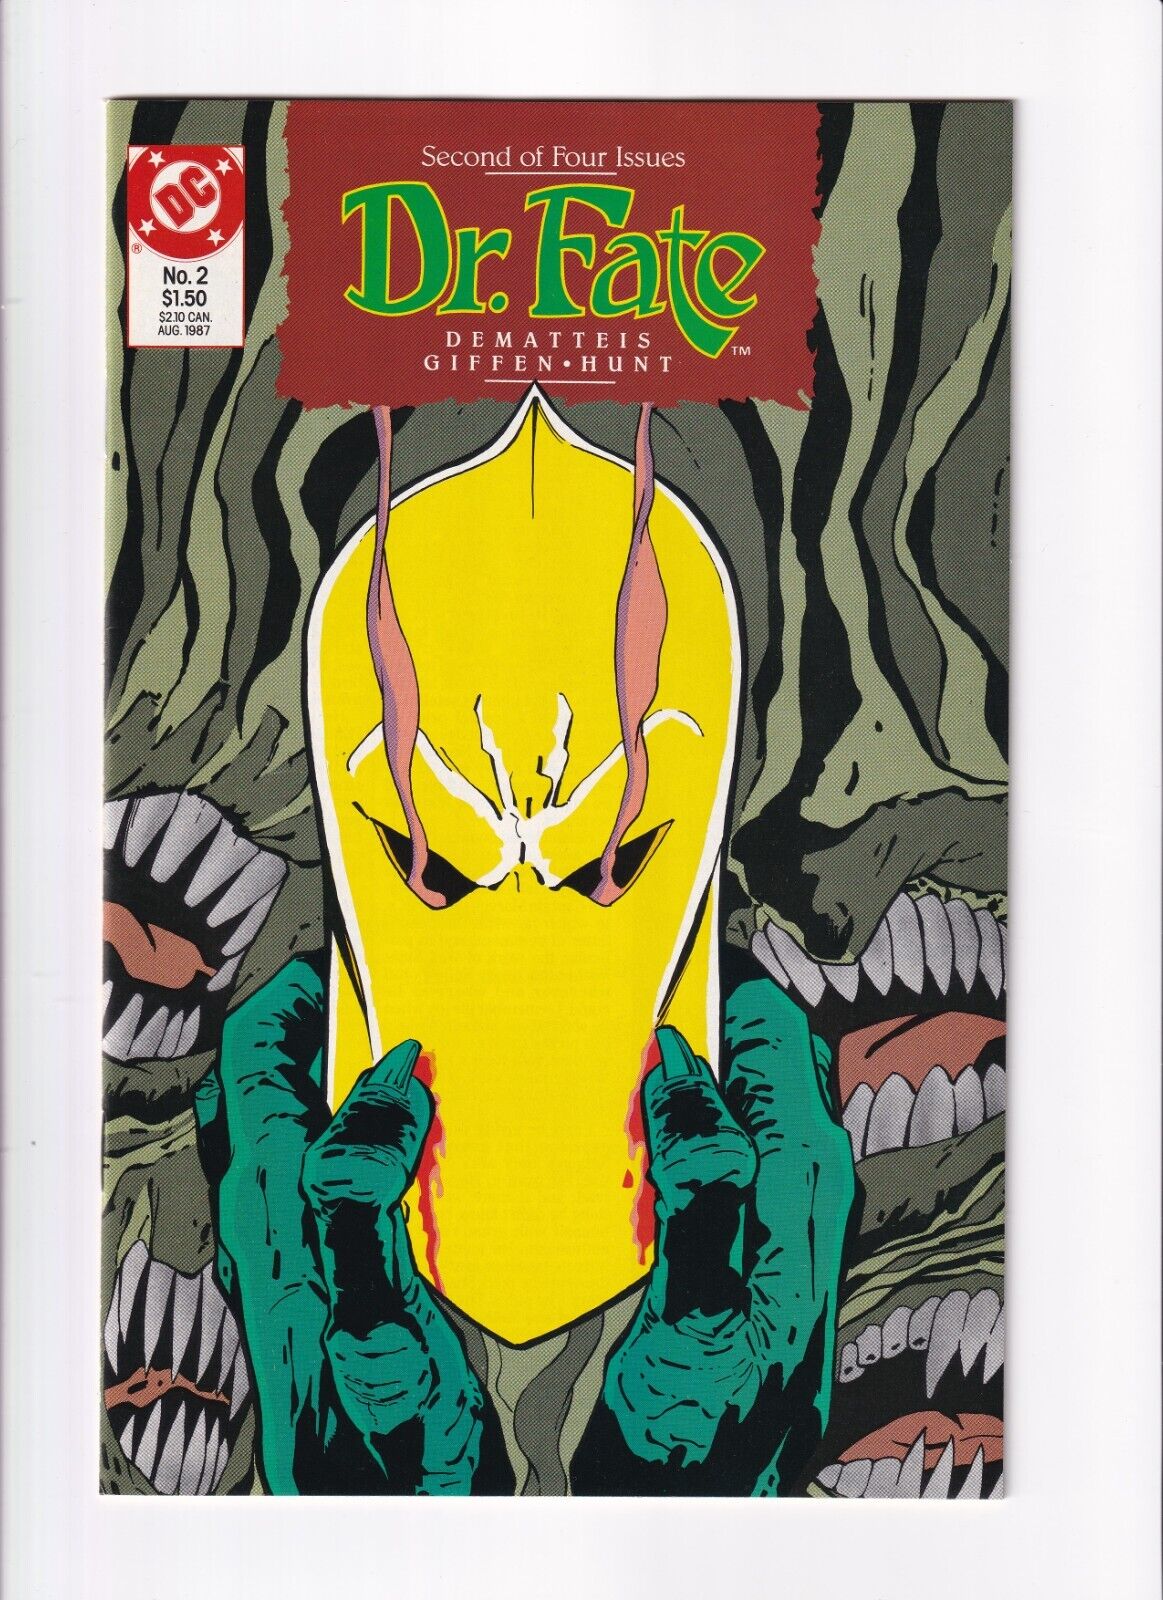 DR. FATE #2 OF 4 ISSUES DC COMICS AUGUST 1987